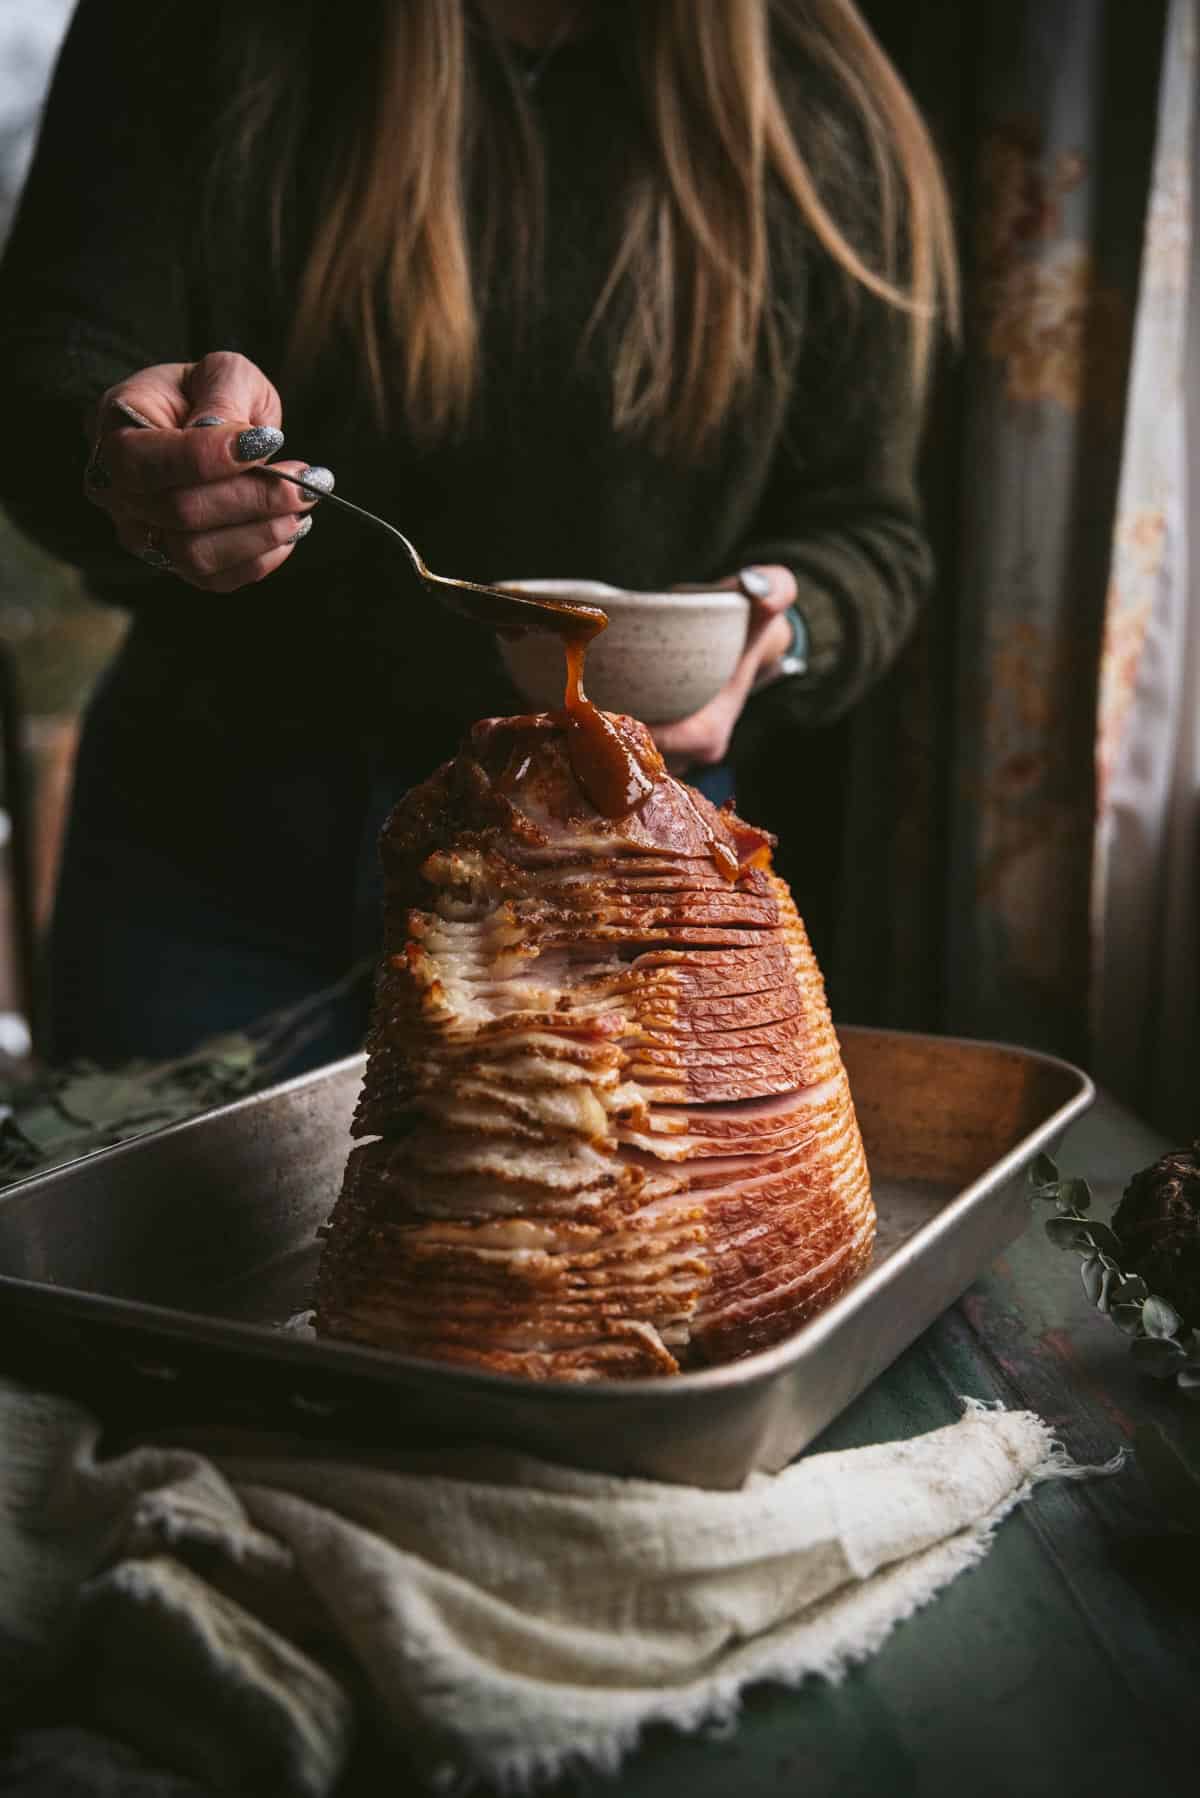 The ham is standing upright in a baking tray and is sliced partially. A woman in a green jumper is pouring the bourbon glaze over the top with a spoon.